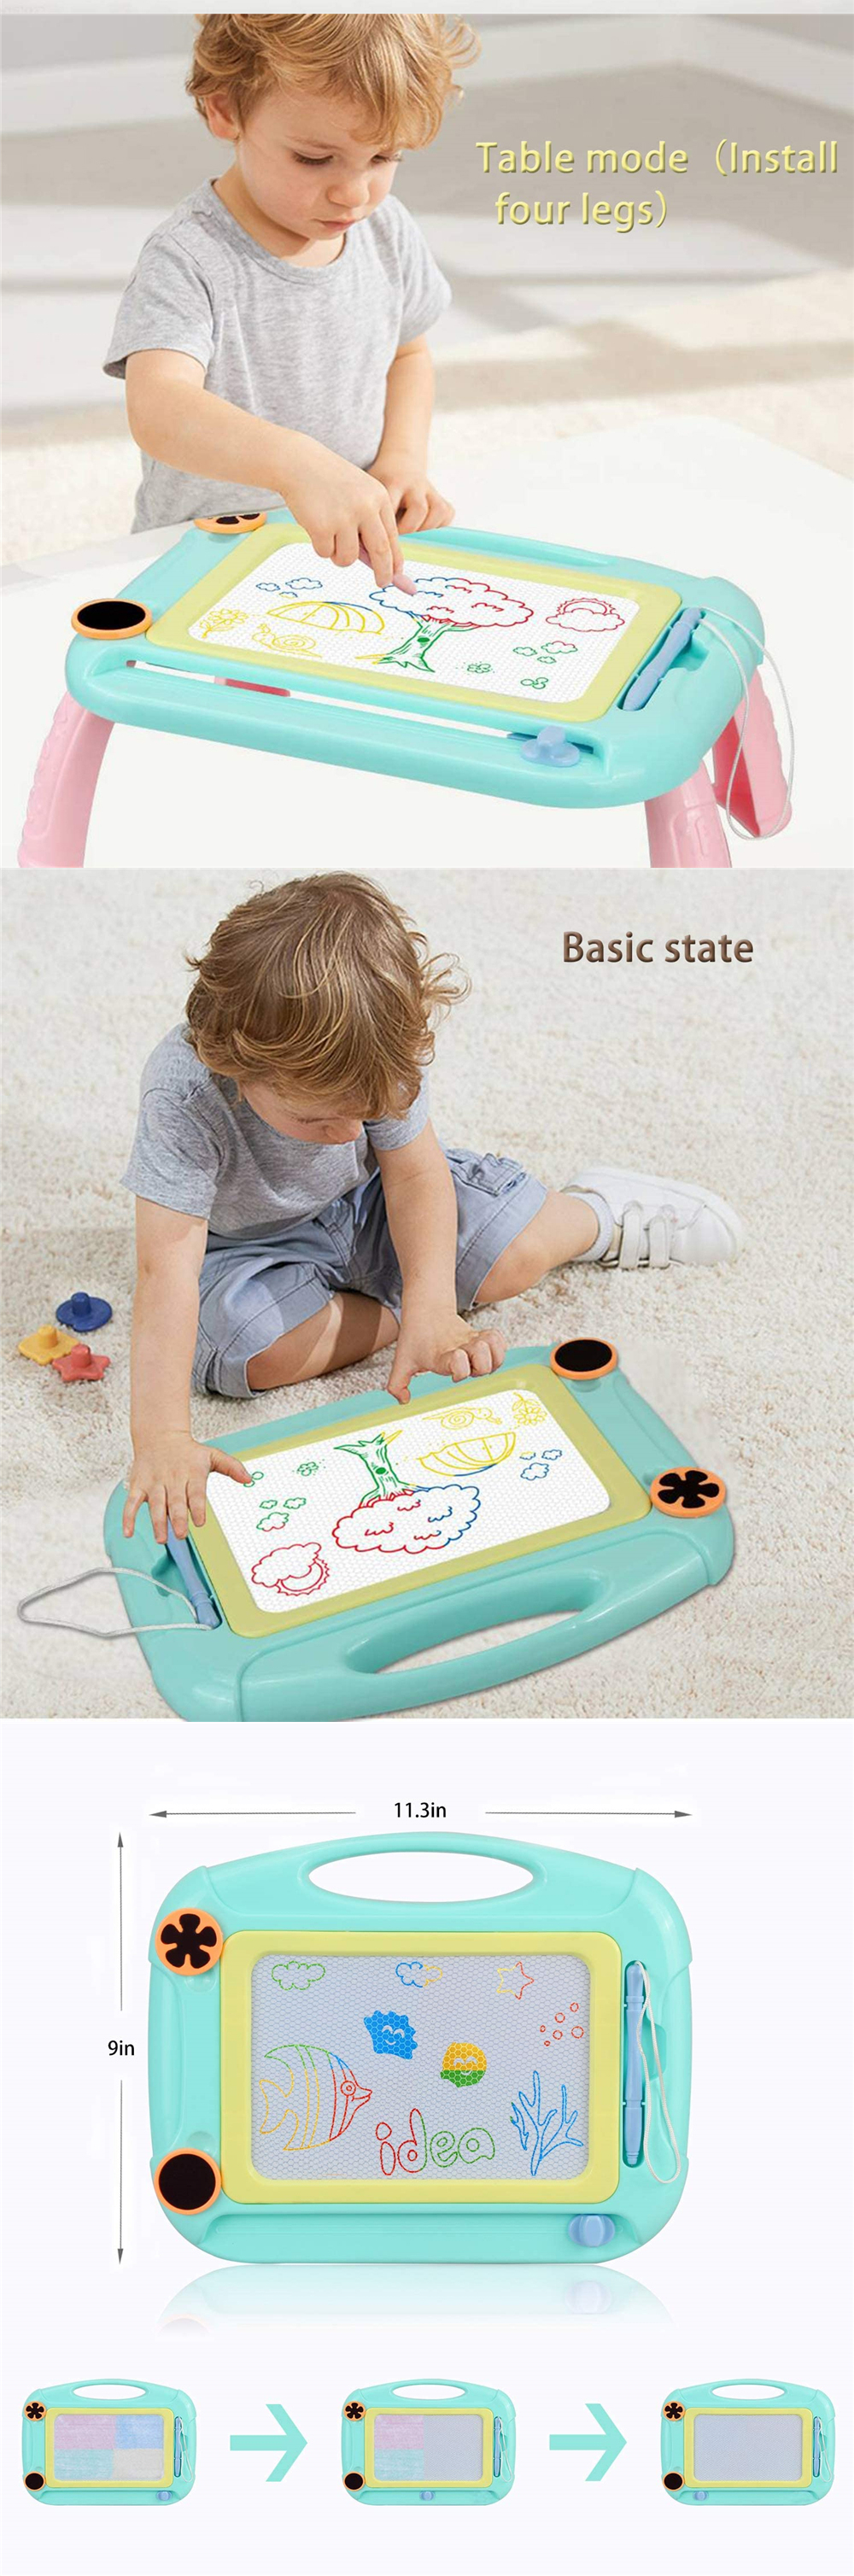 Multi-Functional-Magnetic-Drawing-Board-Desk-Painting-Doodle-Games-Writing-Painting-Pad-for-Children-1685427-2